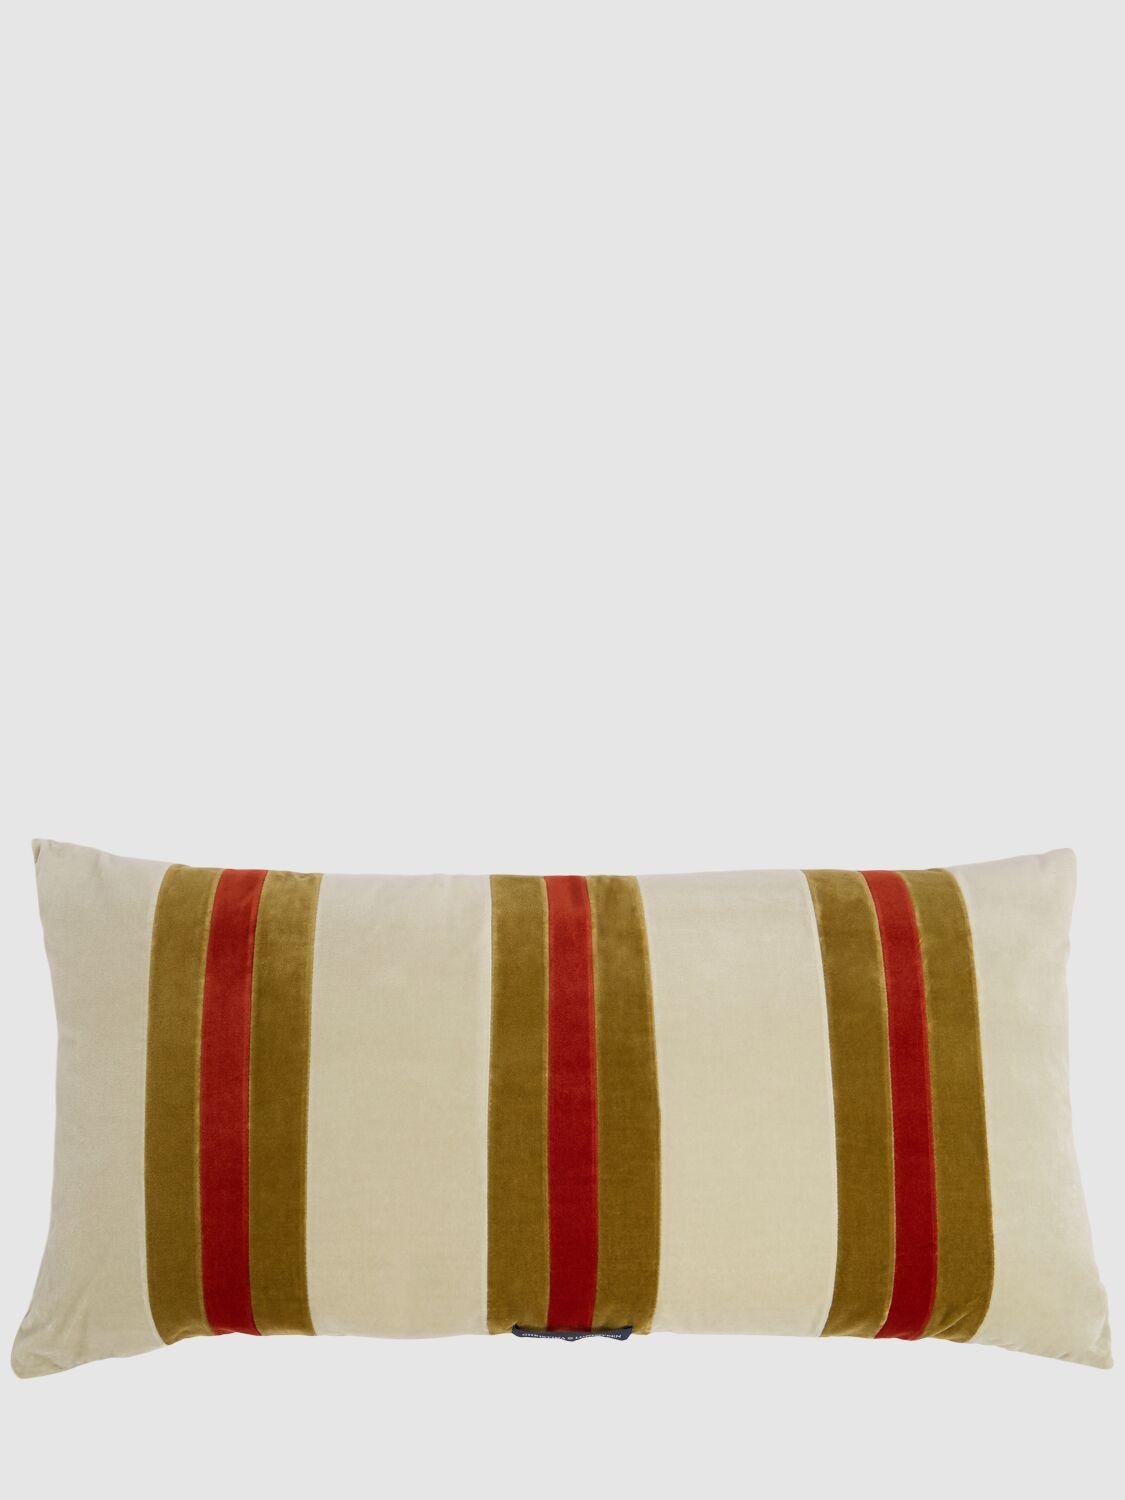 Mimi Cotton Cushion by CHRISTINA LUNDSTEEN